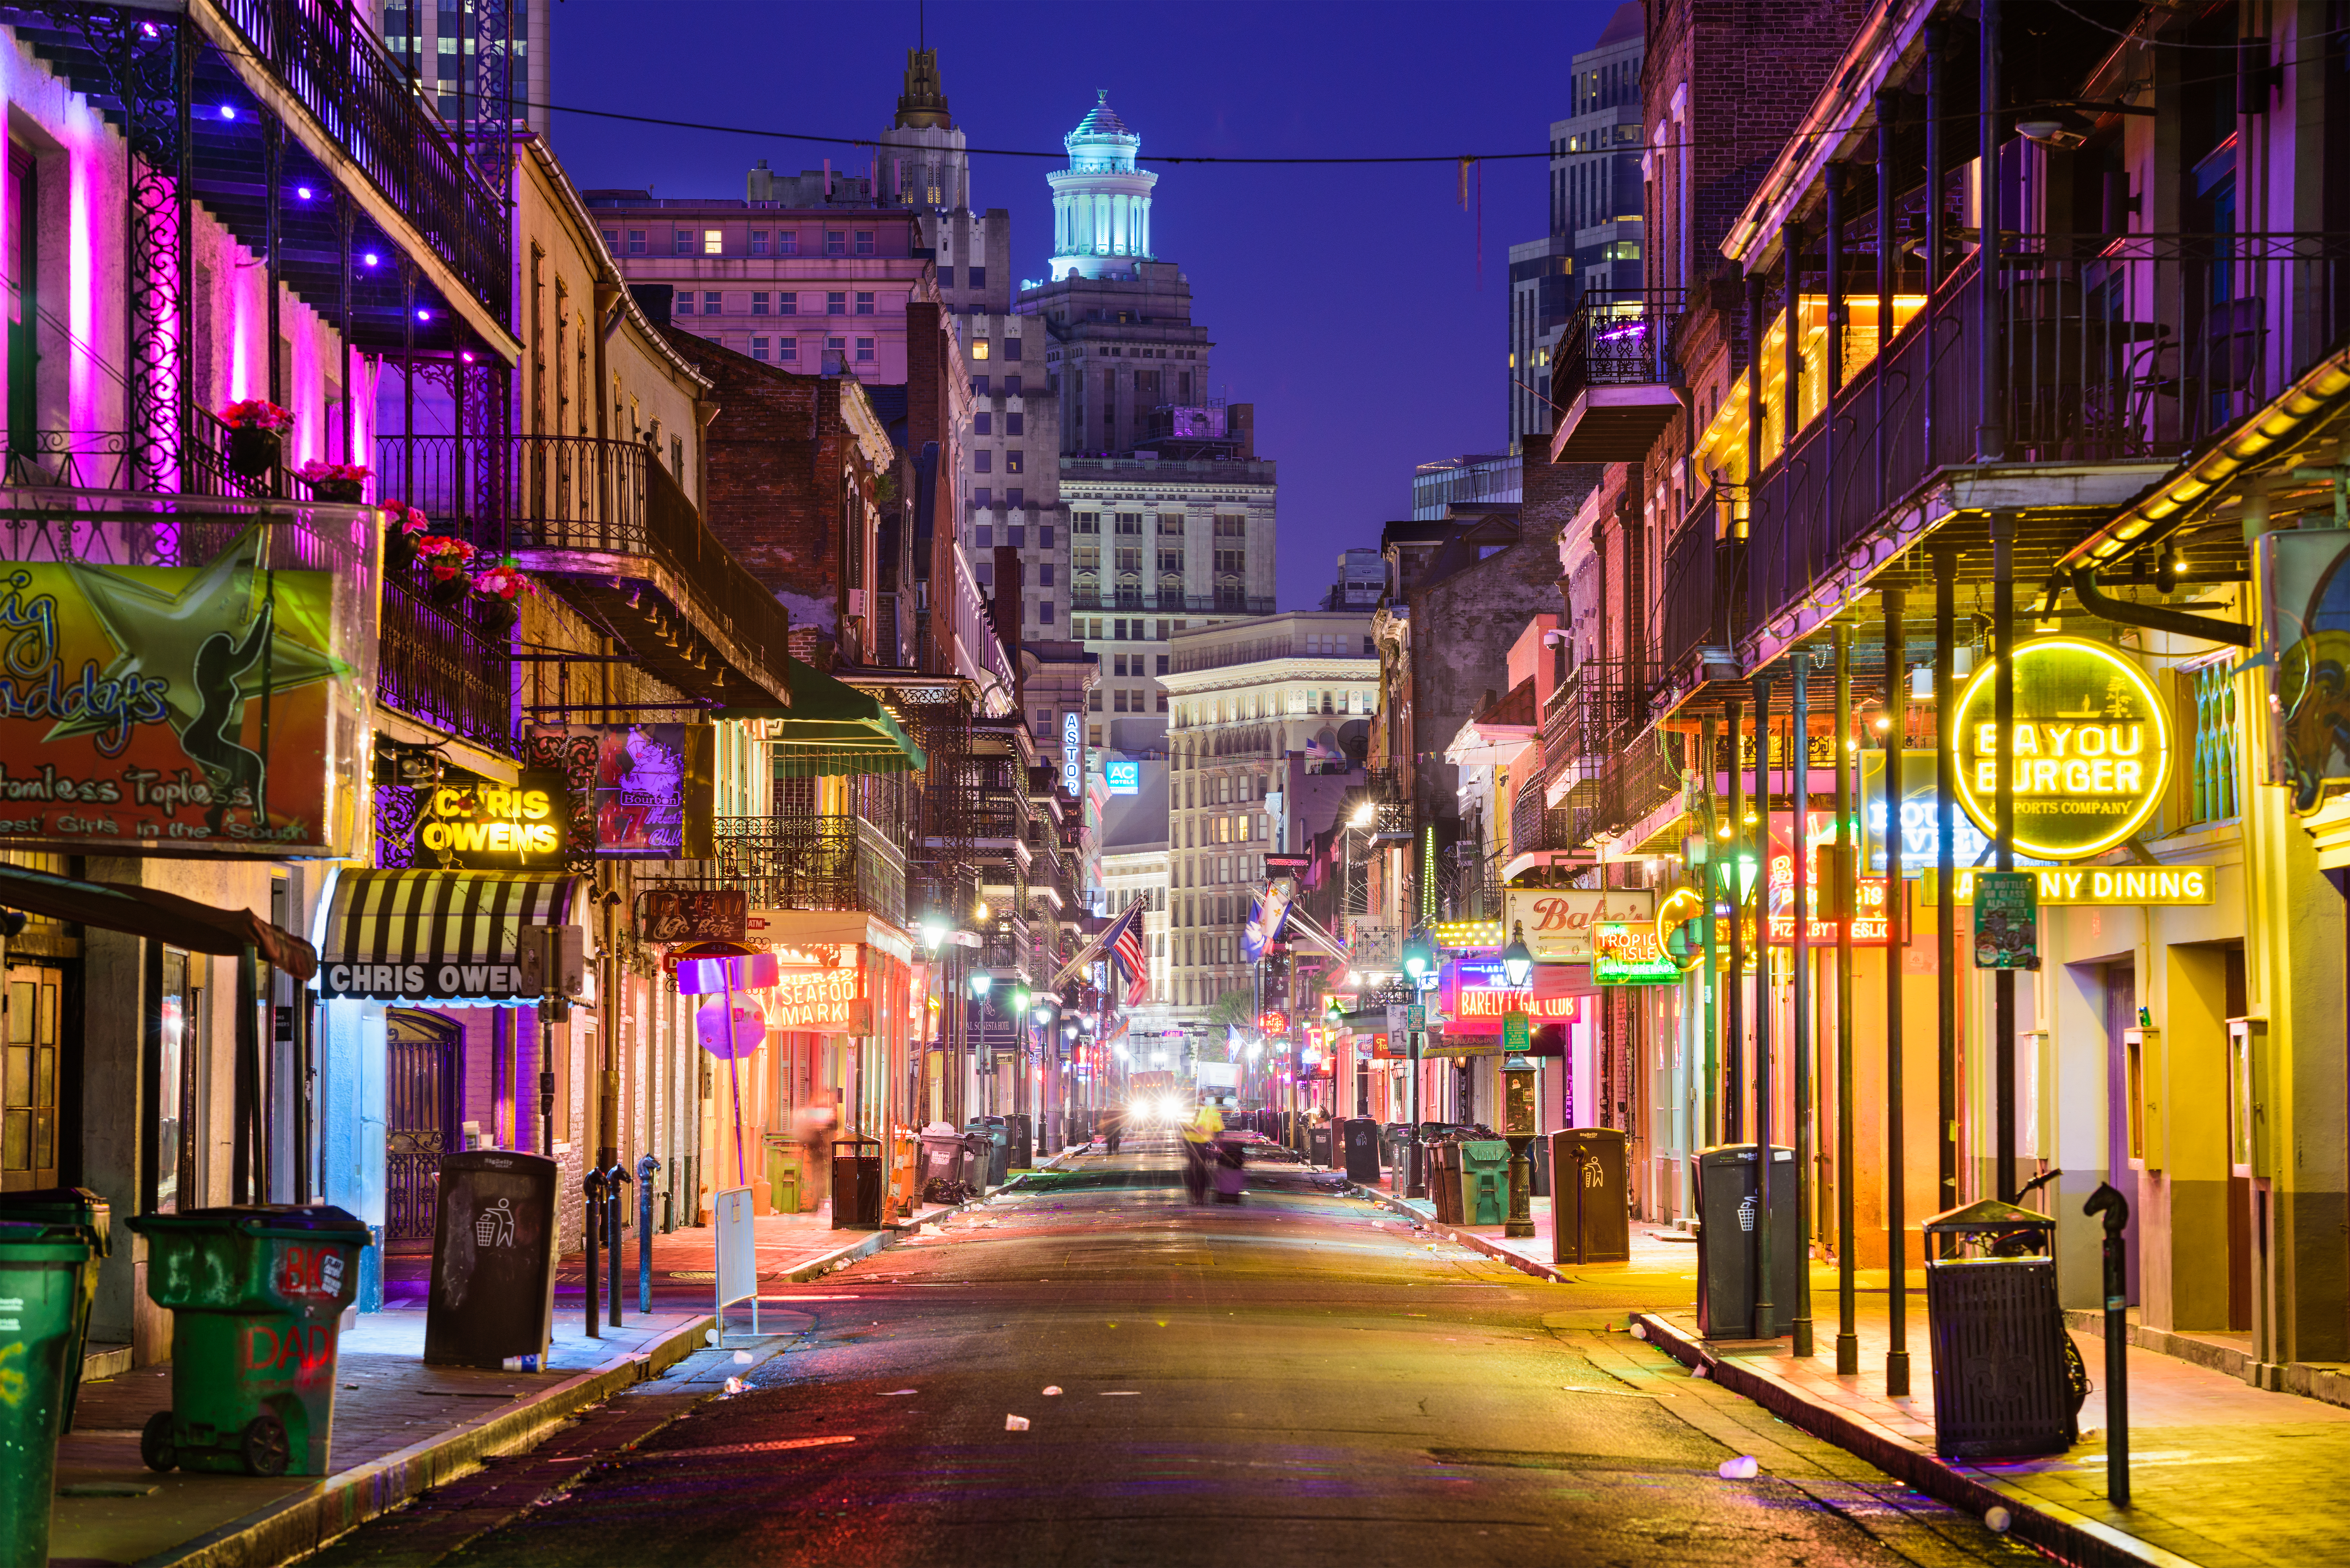 Favorite Attractions in the French Quarter - Bourbon Street